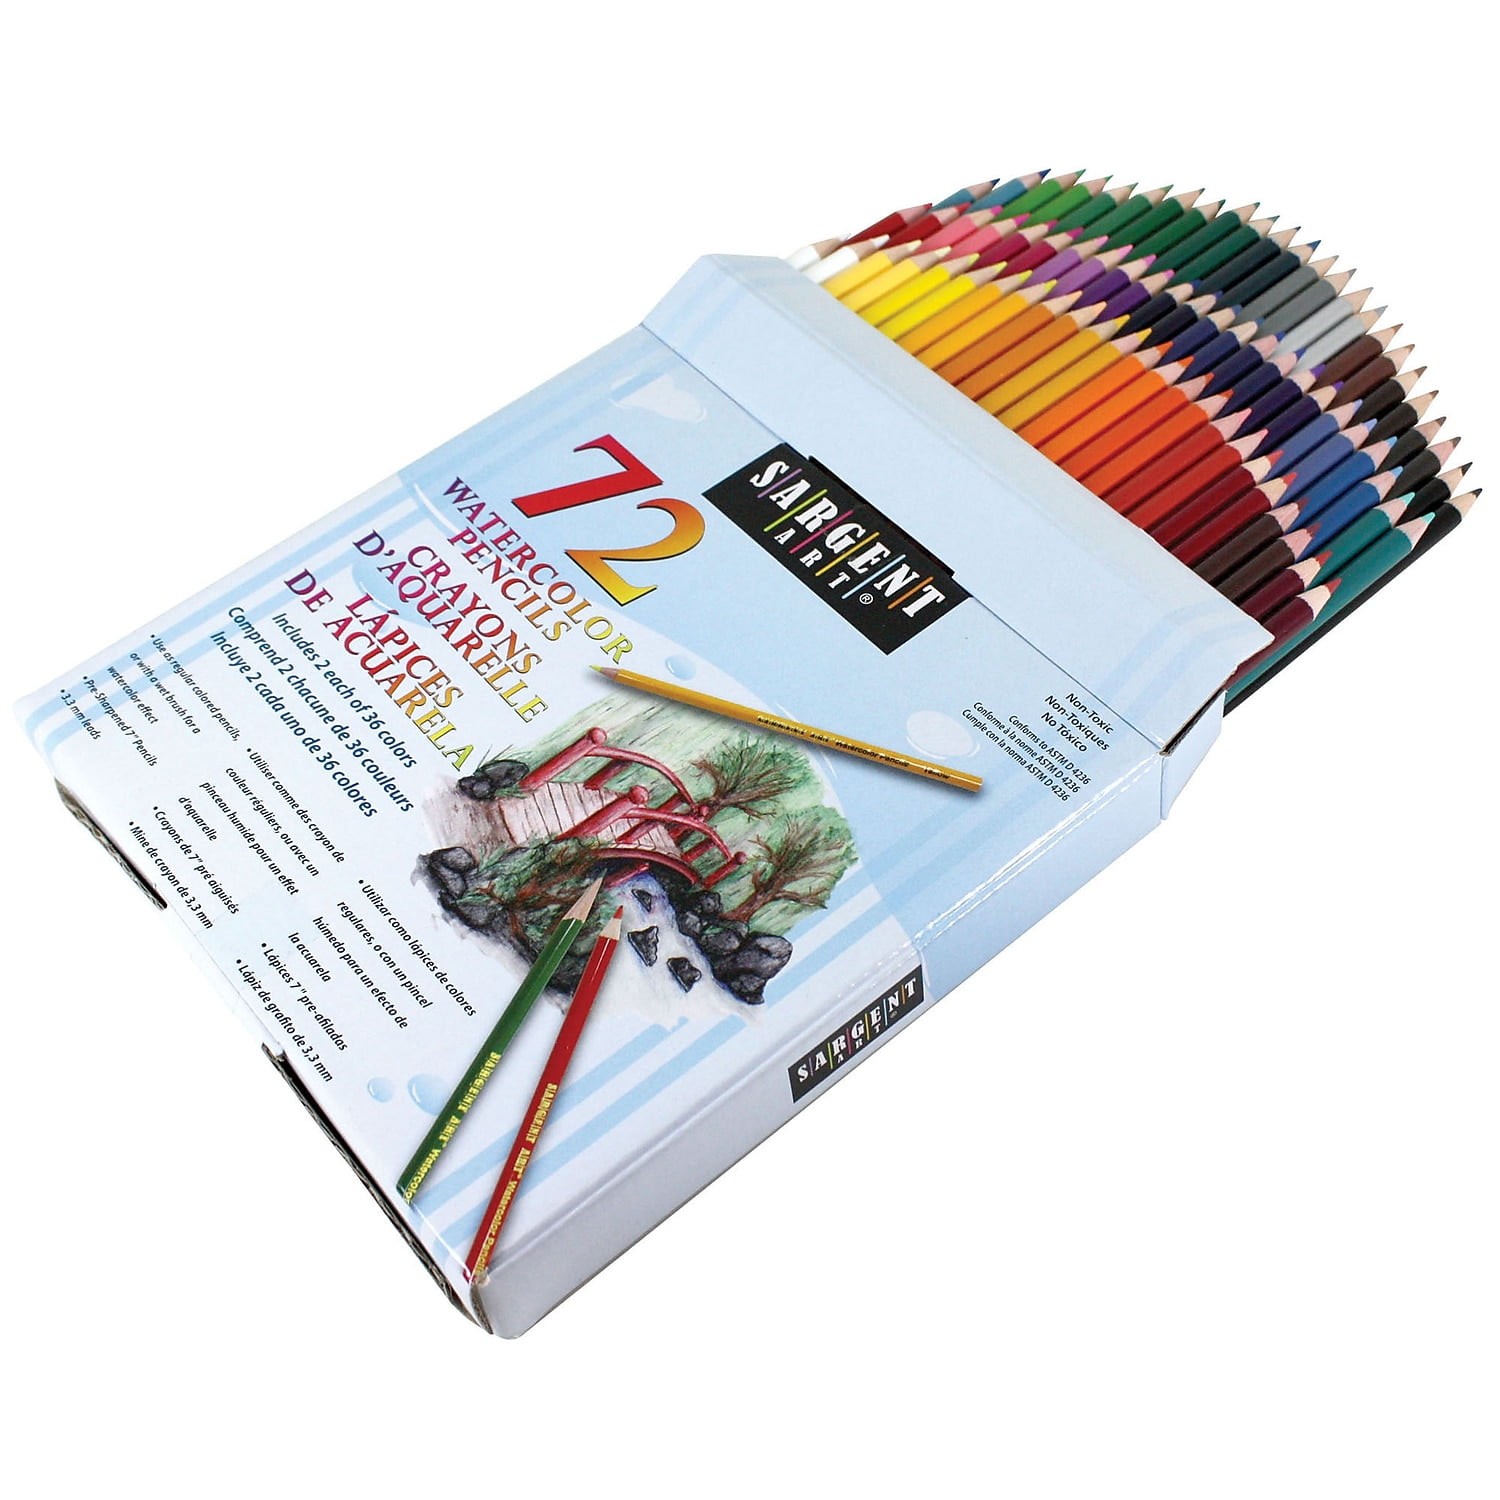 Sargent Art Set of 72 Different Colored Pencils, Artist Quality, Writing,  Drawing, Illustration, Non-Toxic